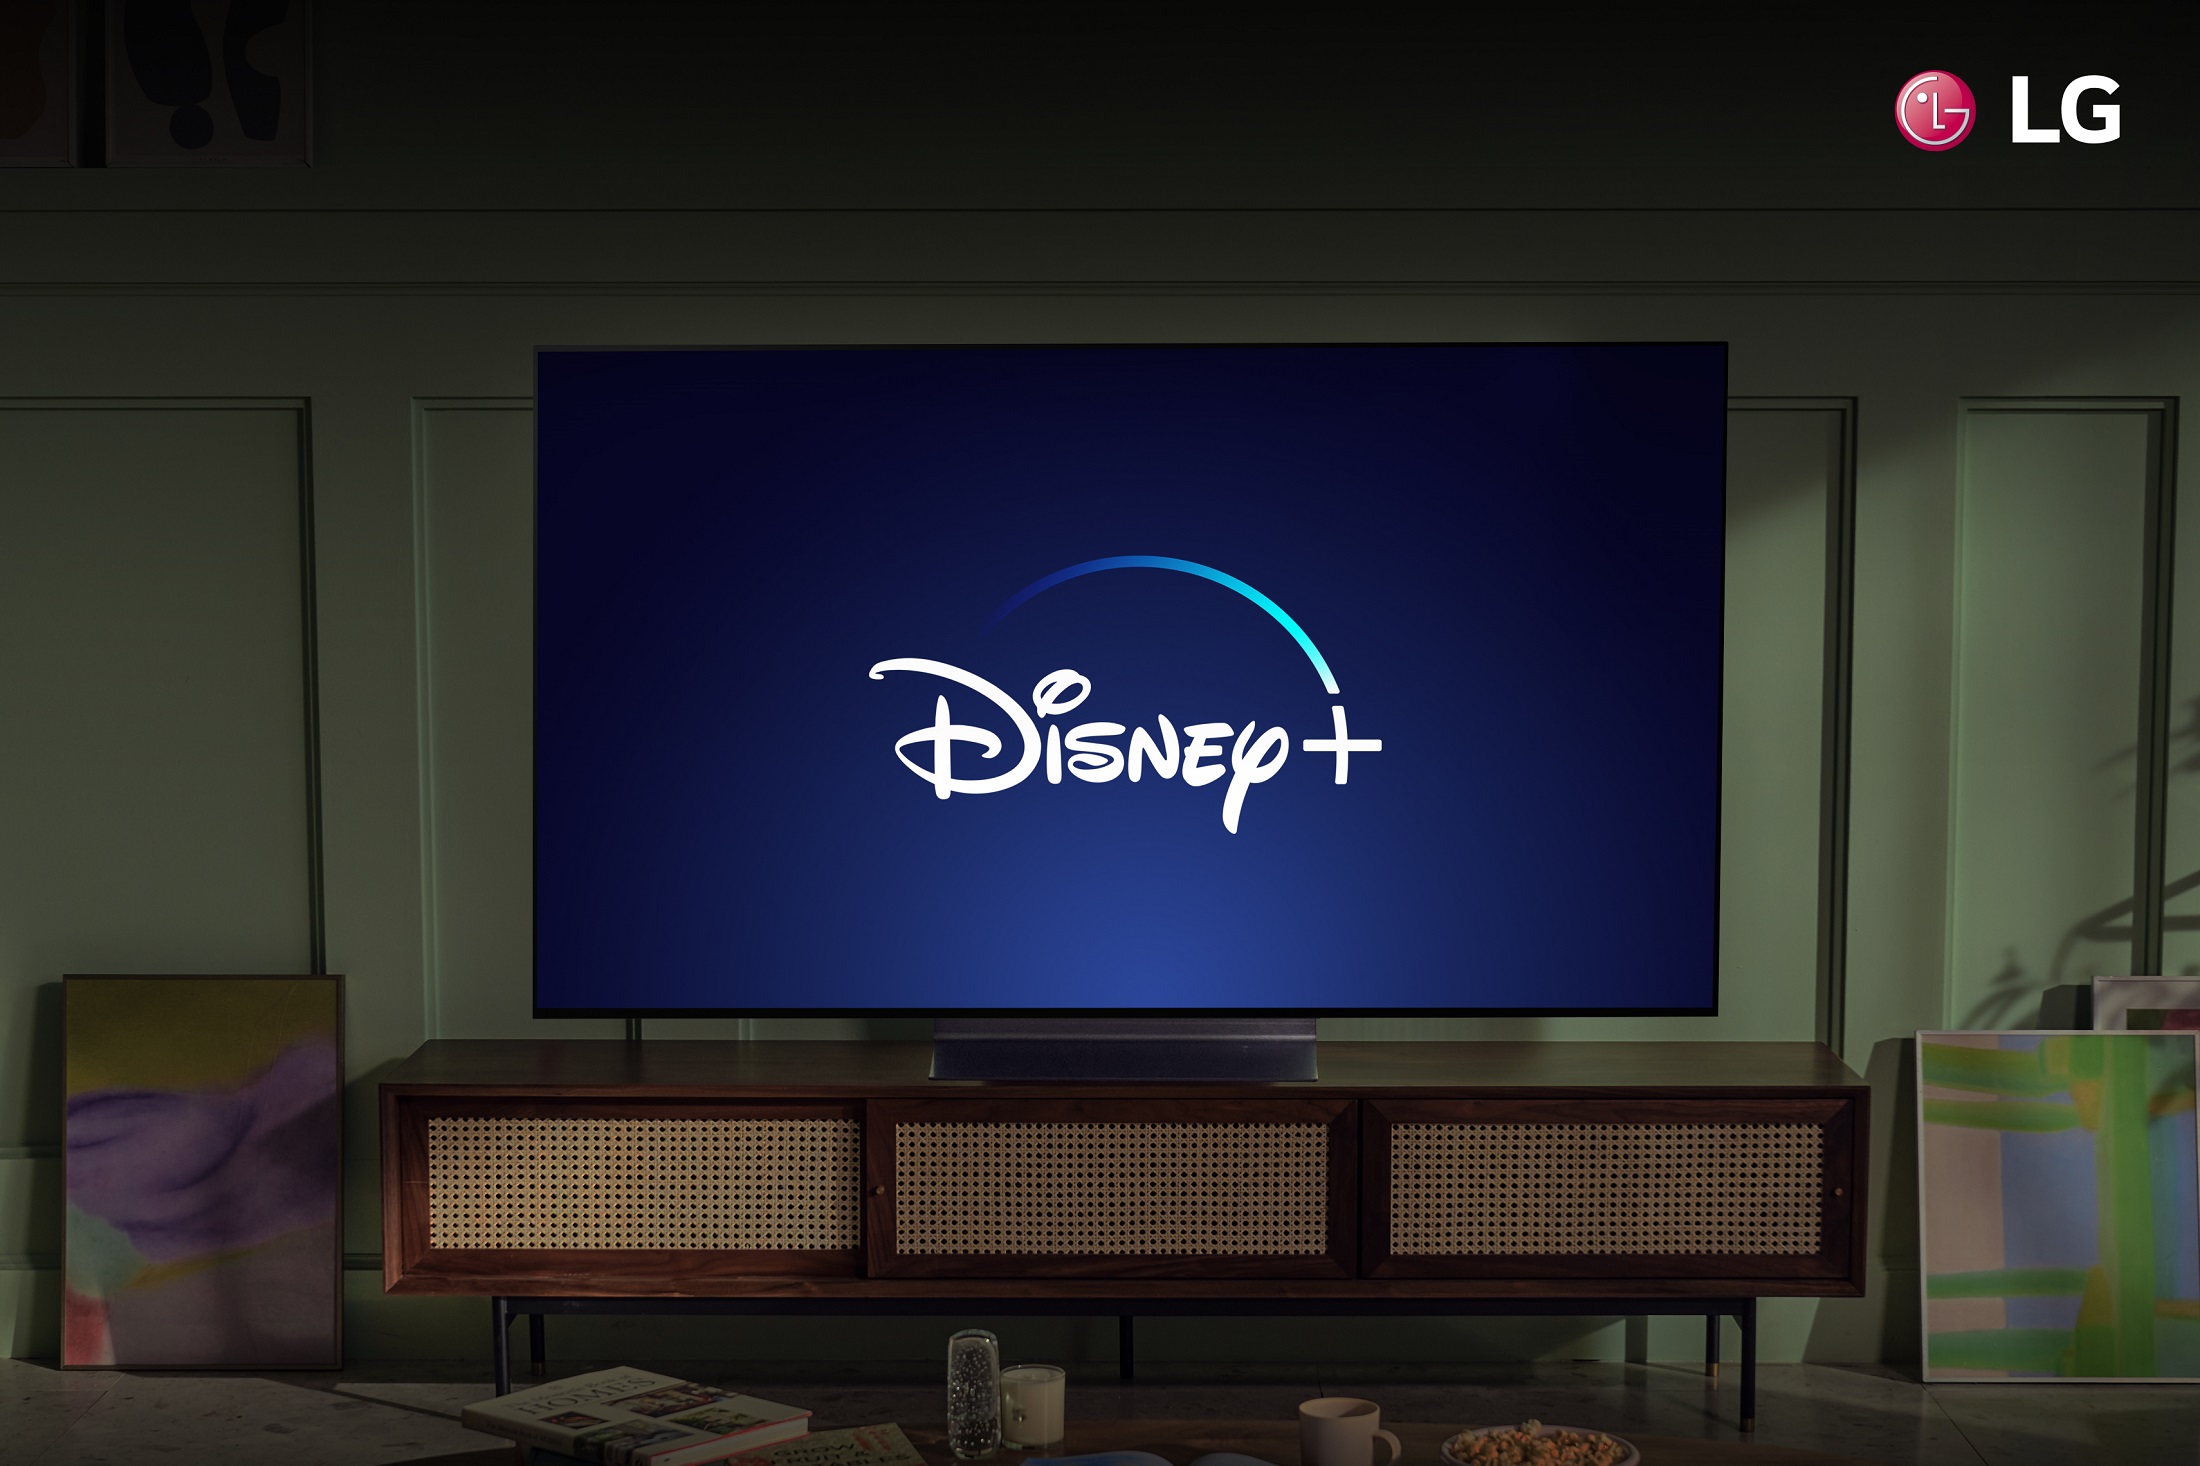 An LG TV in a living room displaying the Disney+ logo to celebrate the streaming service coming to more LG Smart TVs.